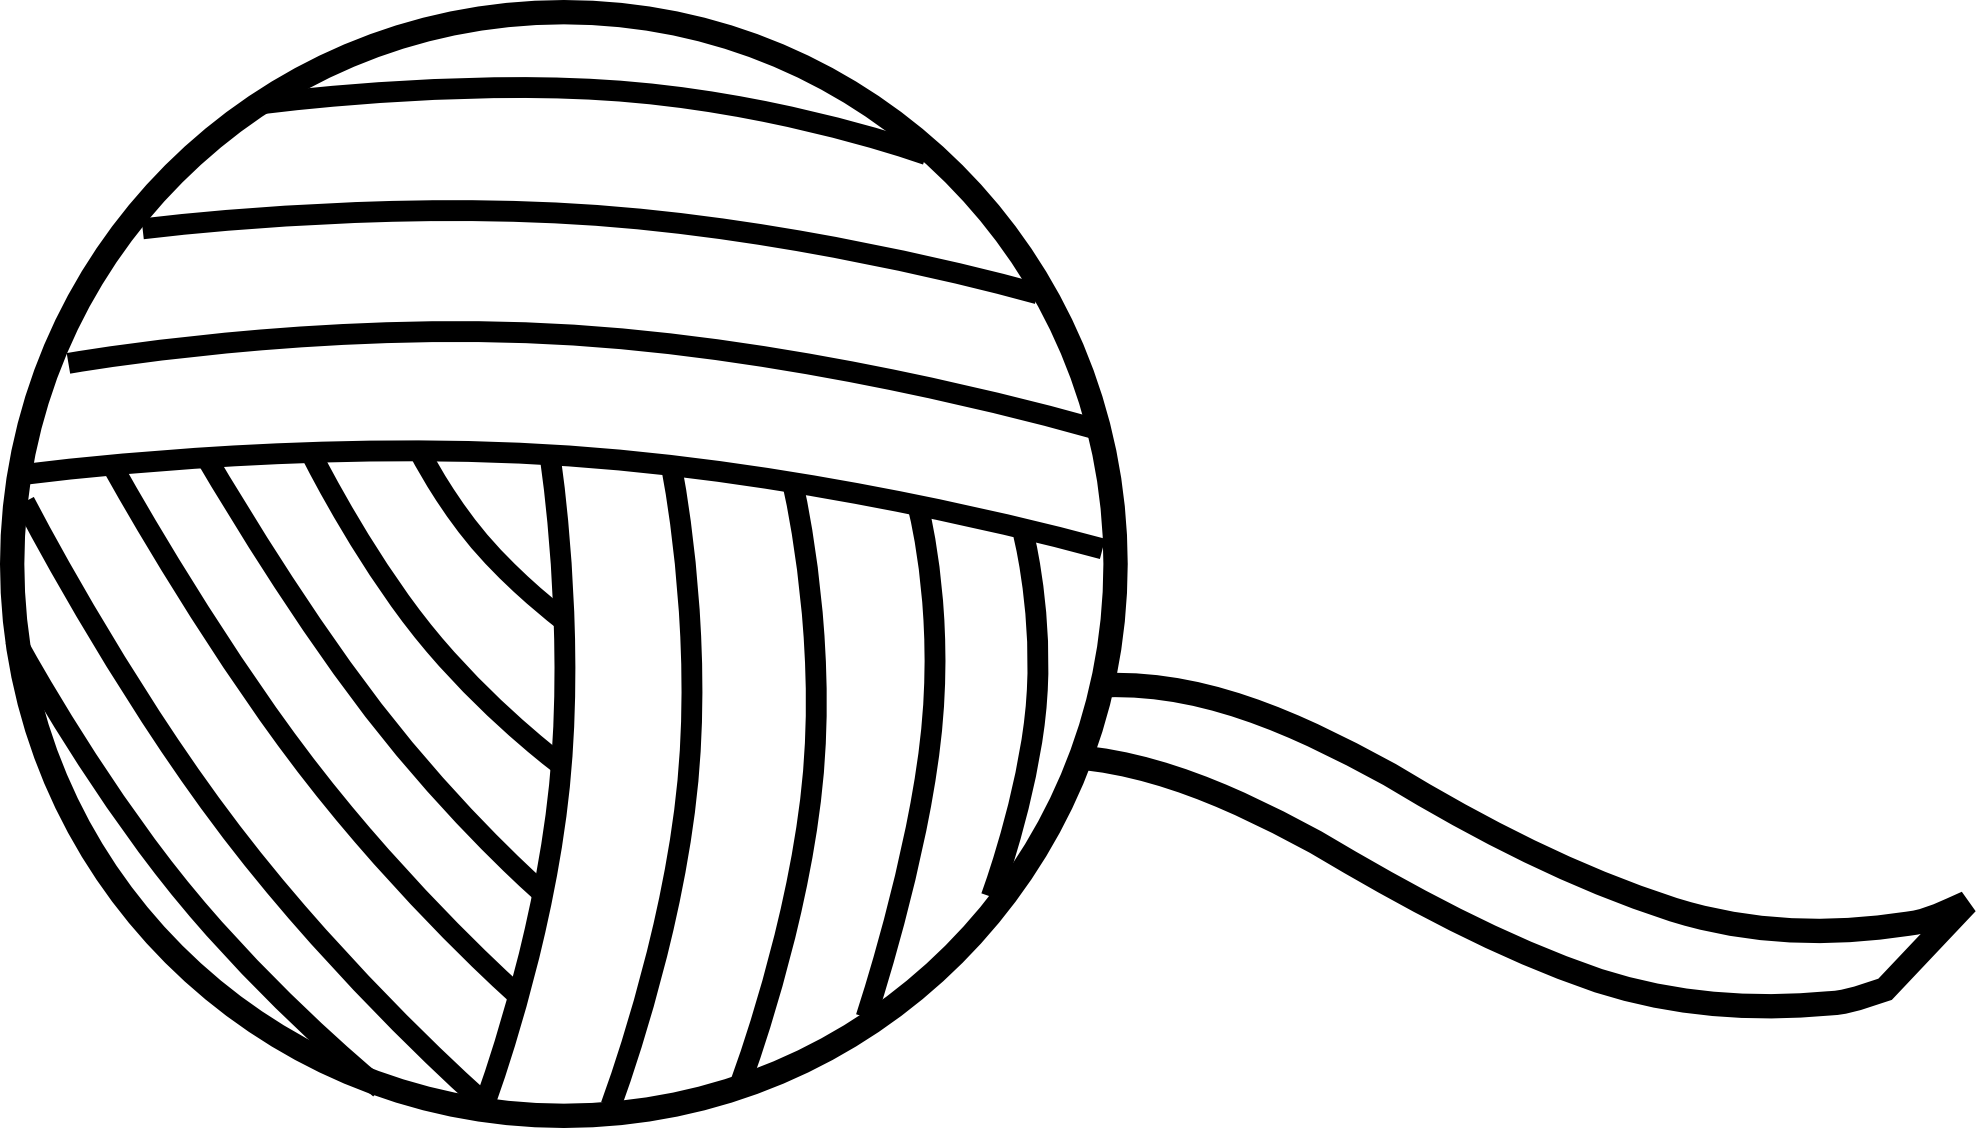 Yarn Clipart Black And White.